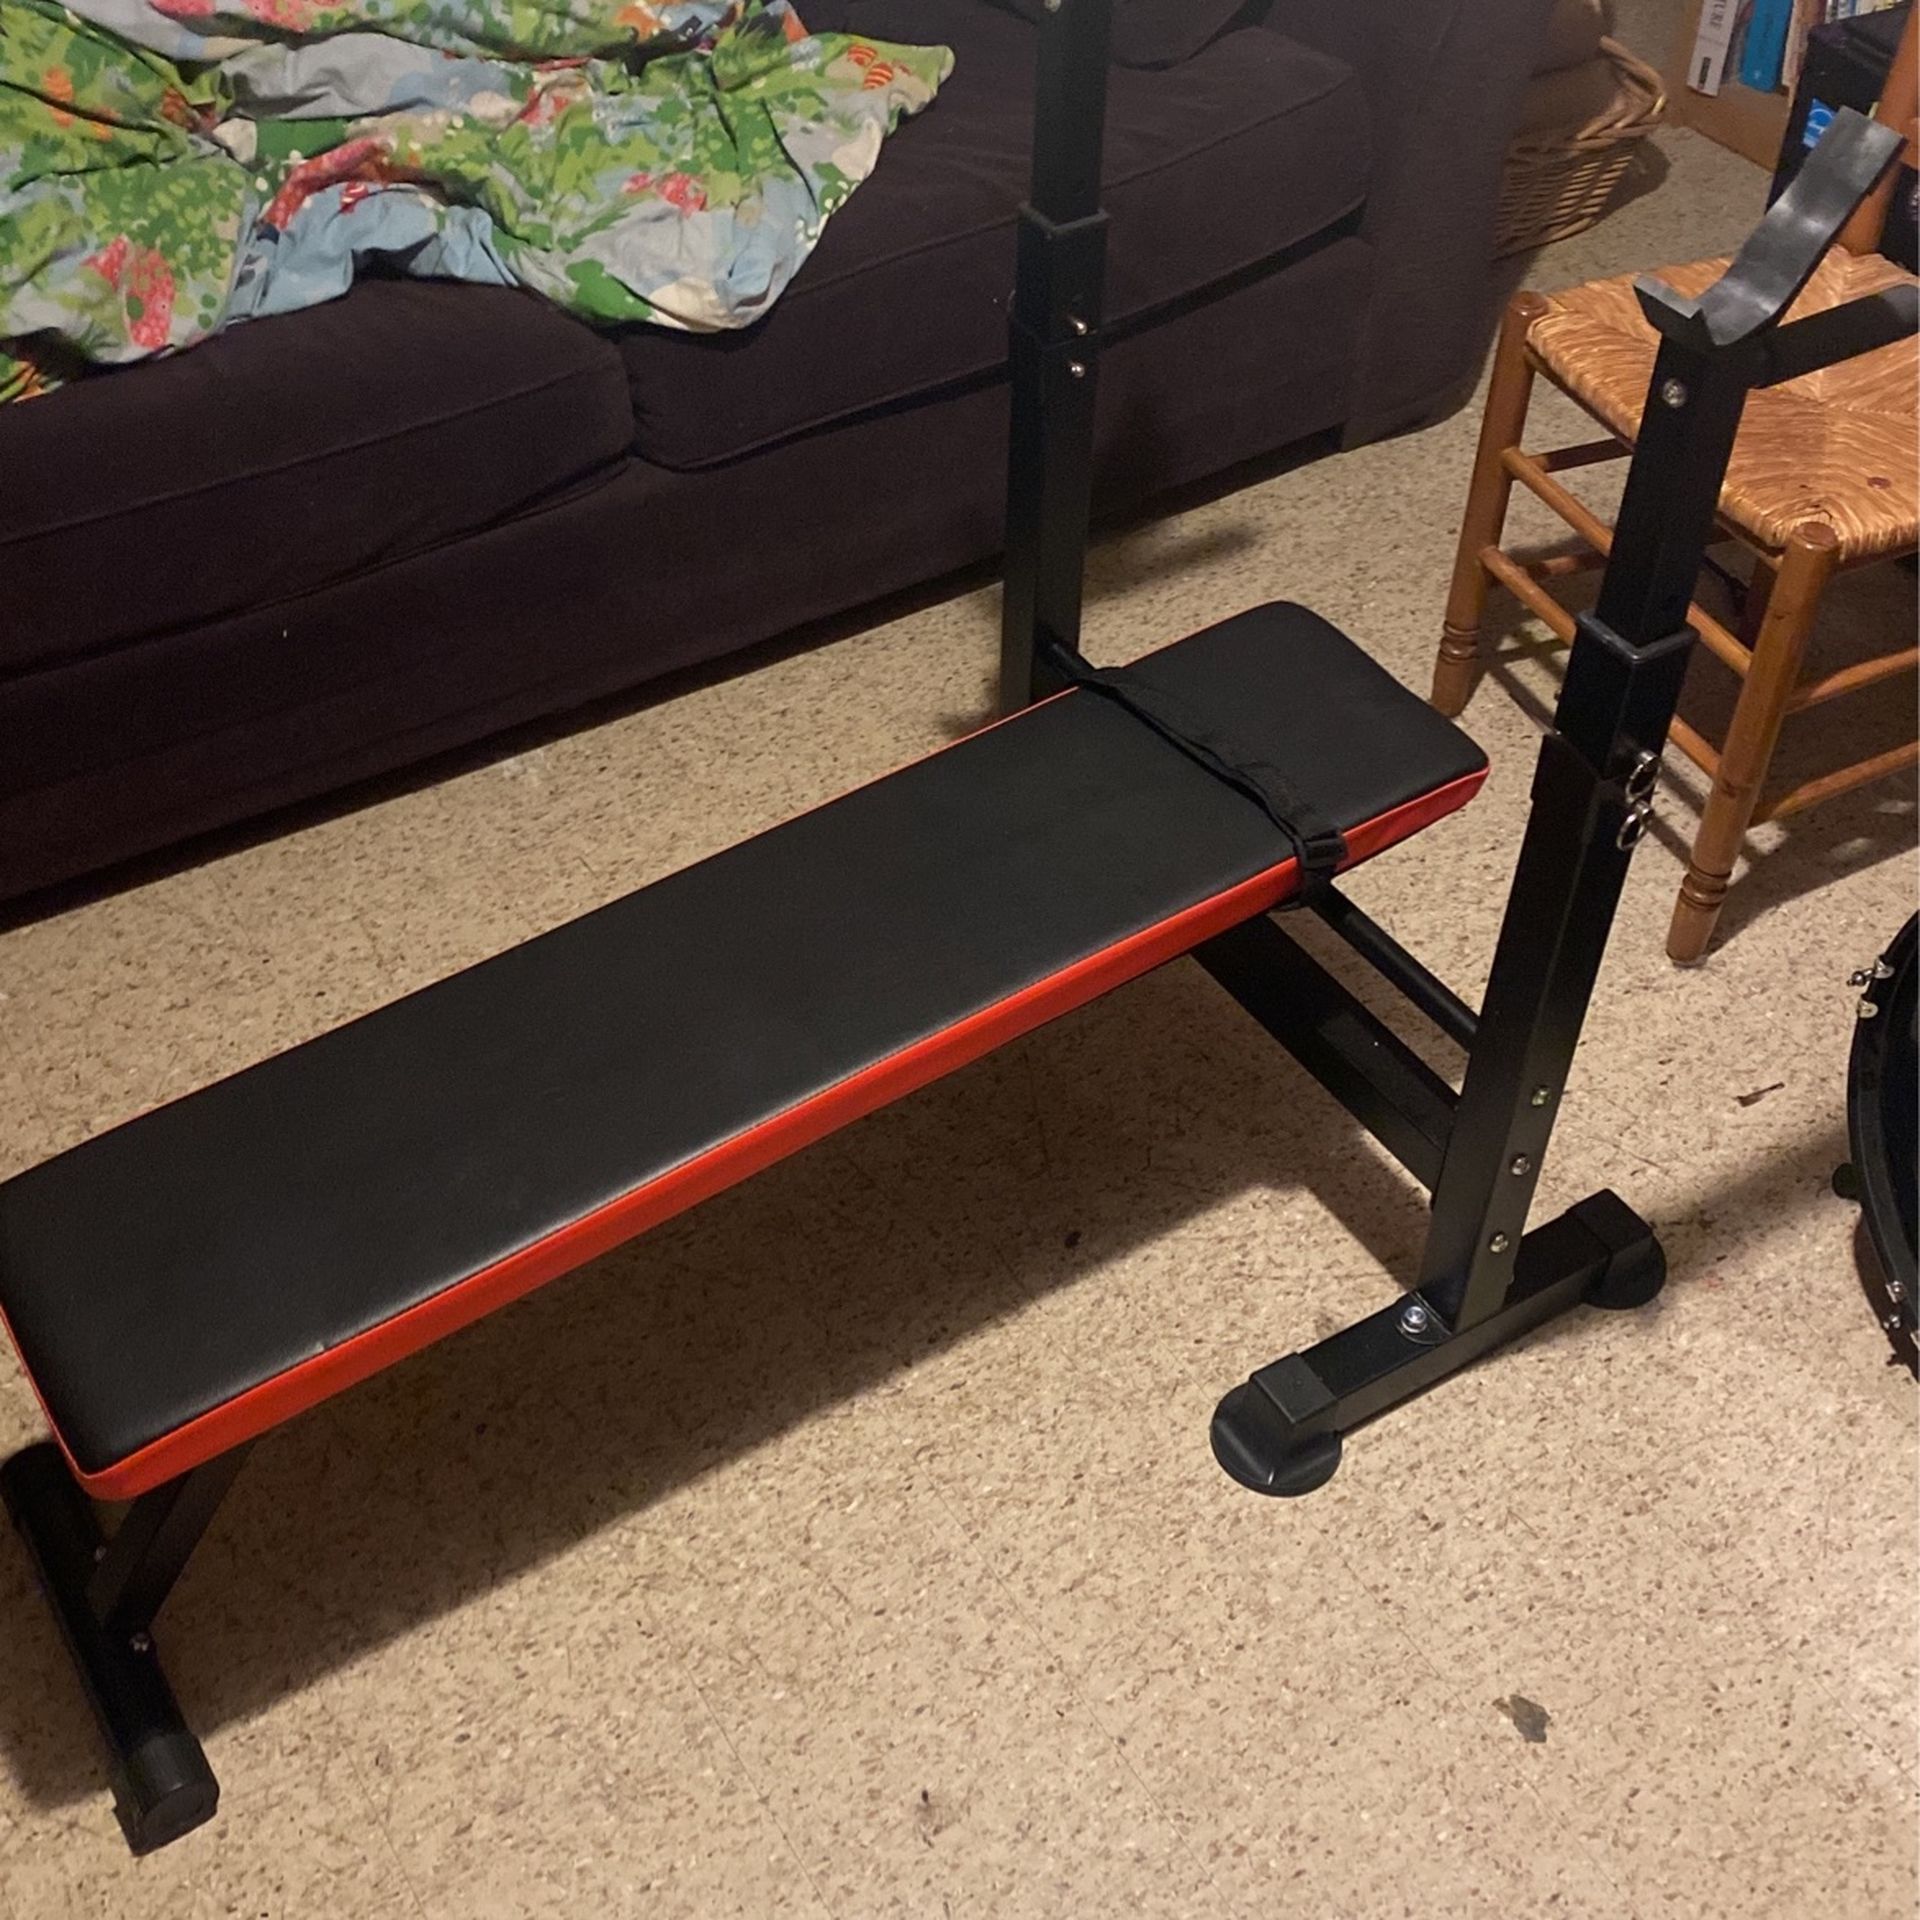 Bench Press Set (doesn’t Include weights)